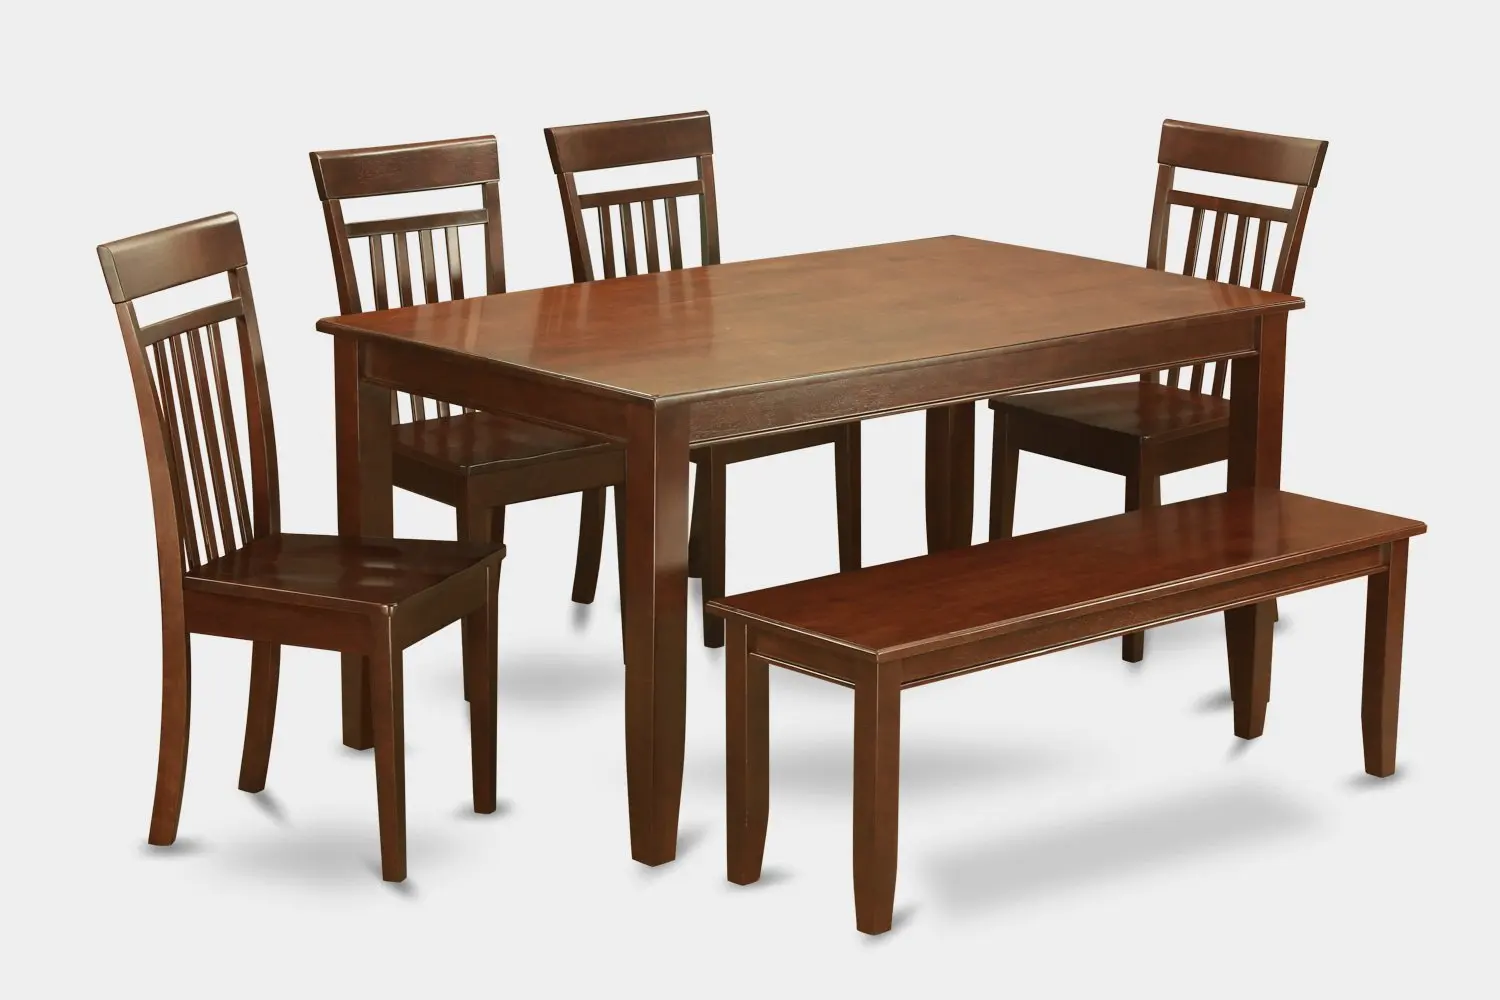 Cheap Dining Table Set, find Dining Table Set deals on line at Alibaba.com